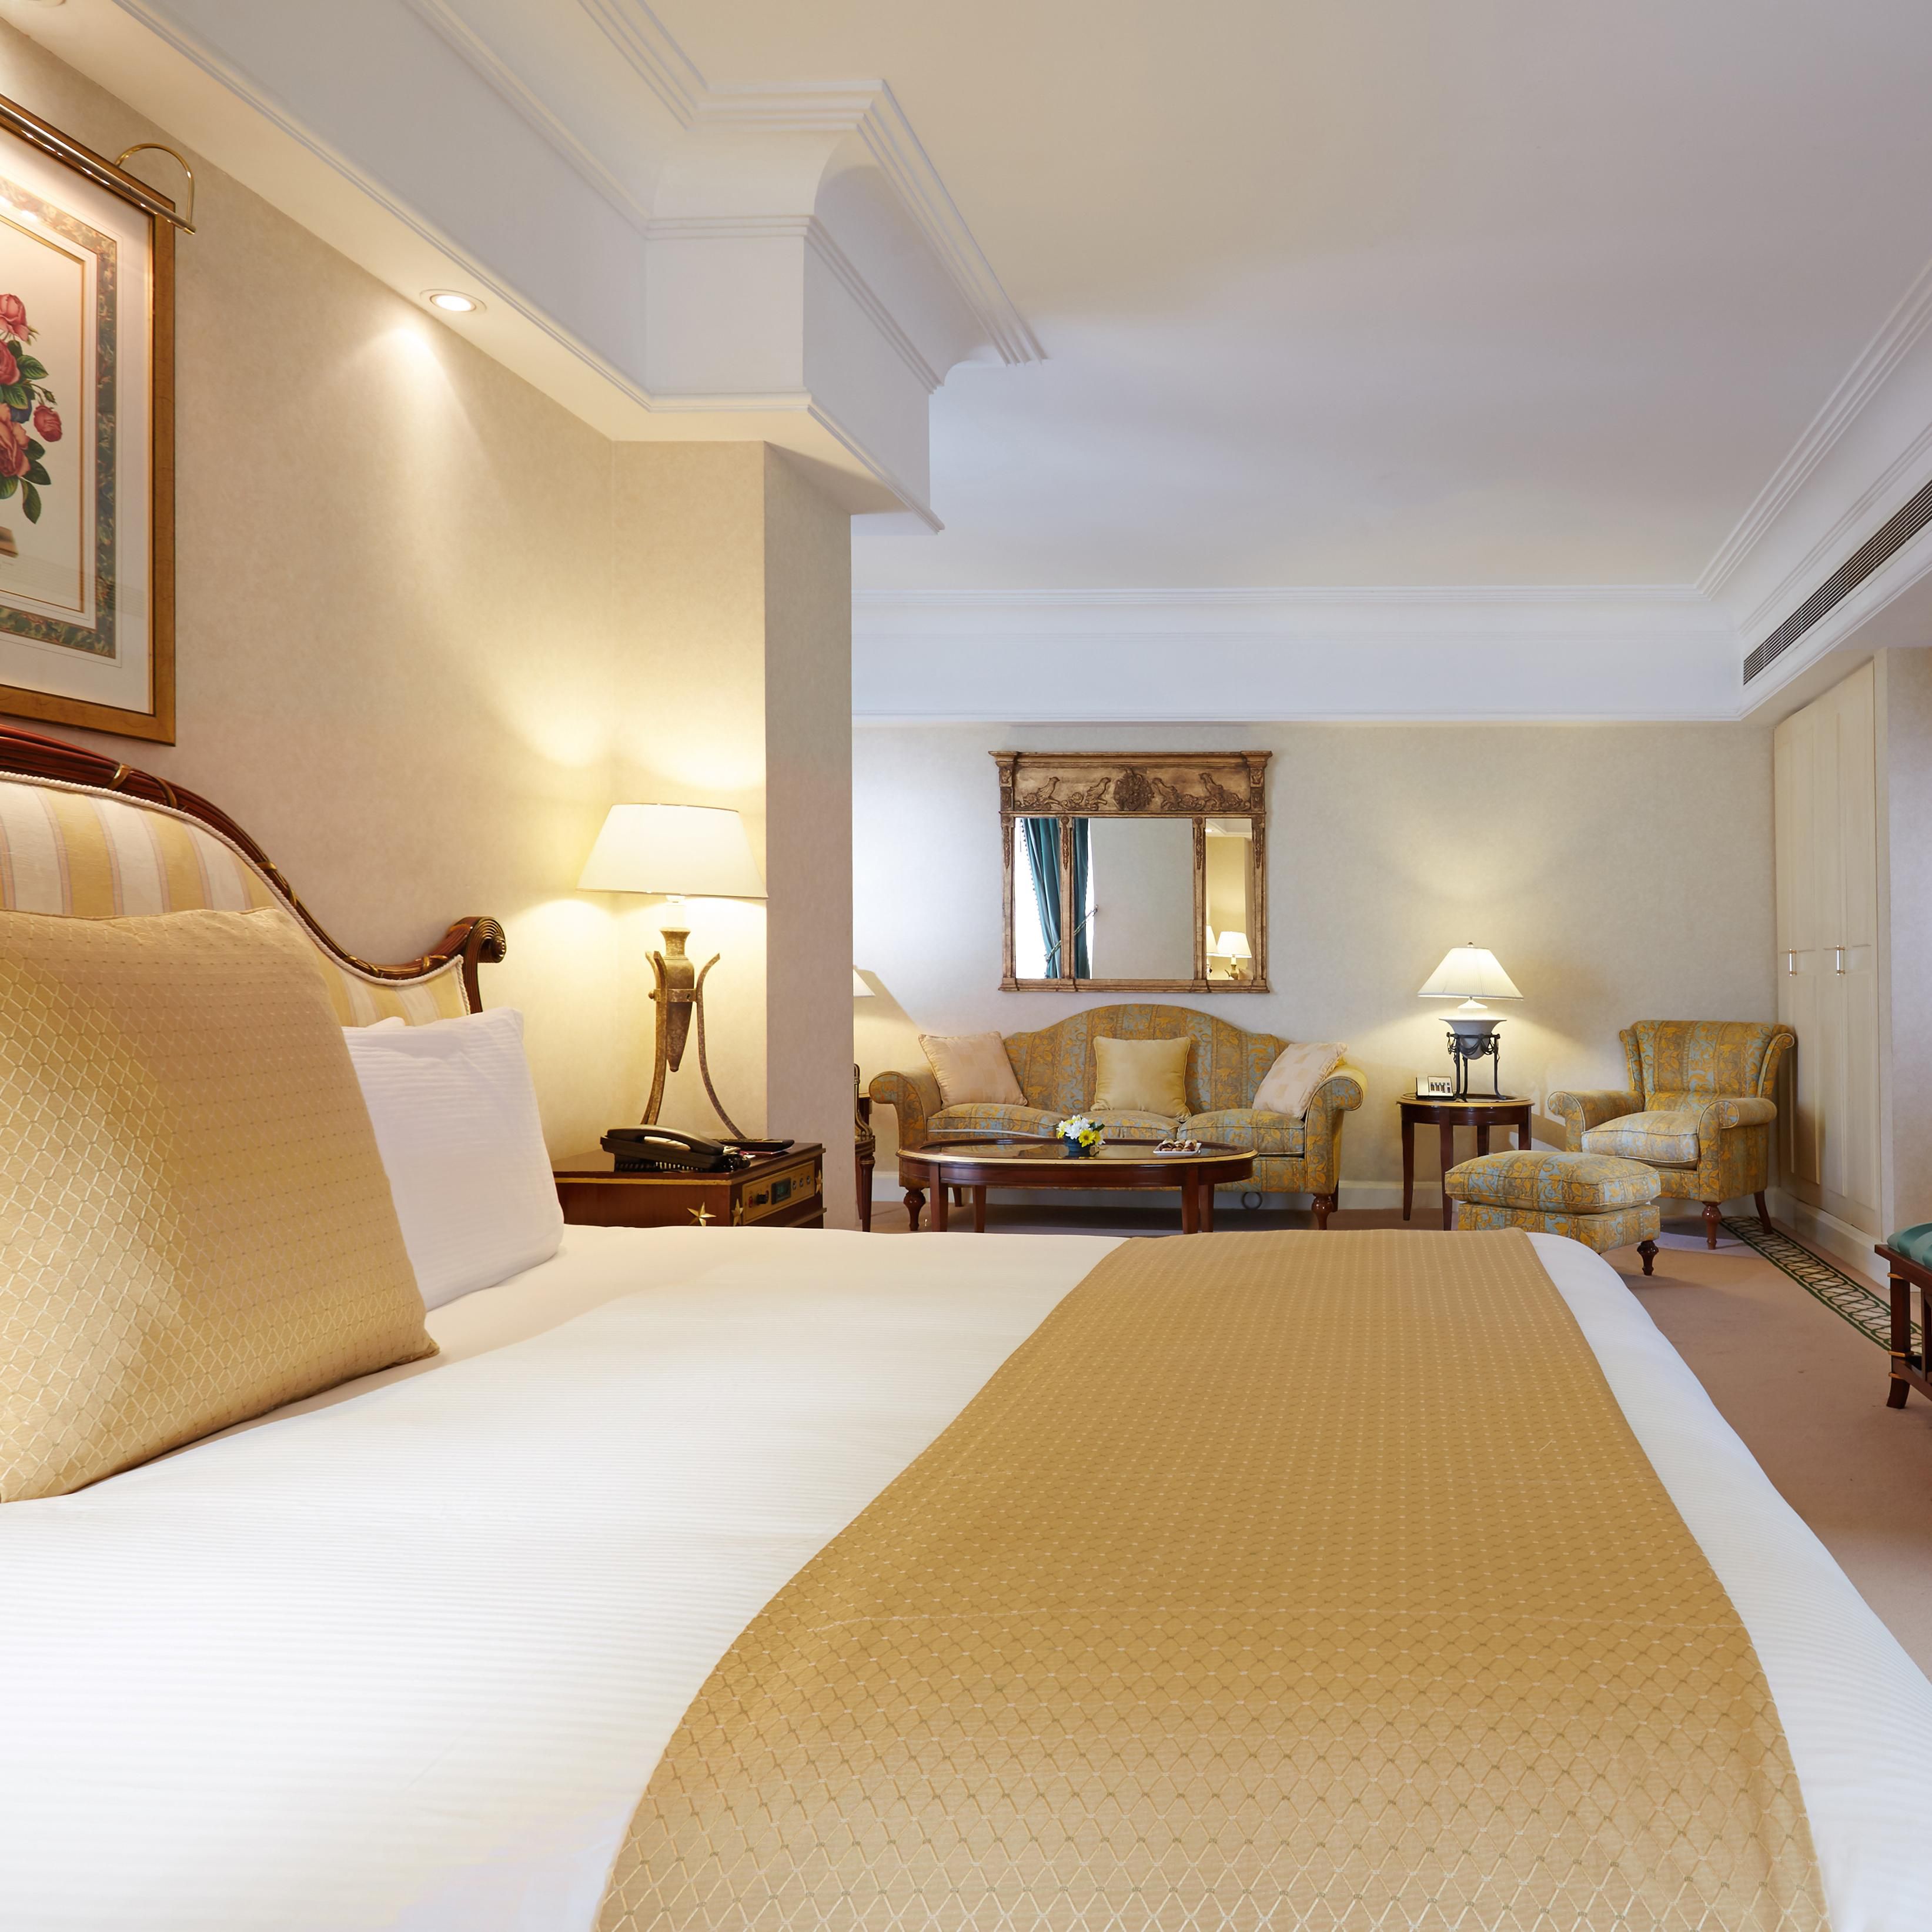 The stylish Presidential Suite gives you 125 sqm of space